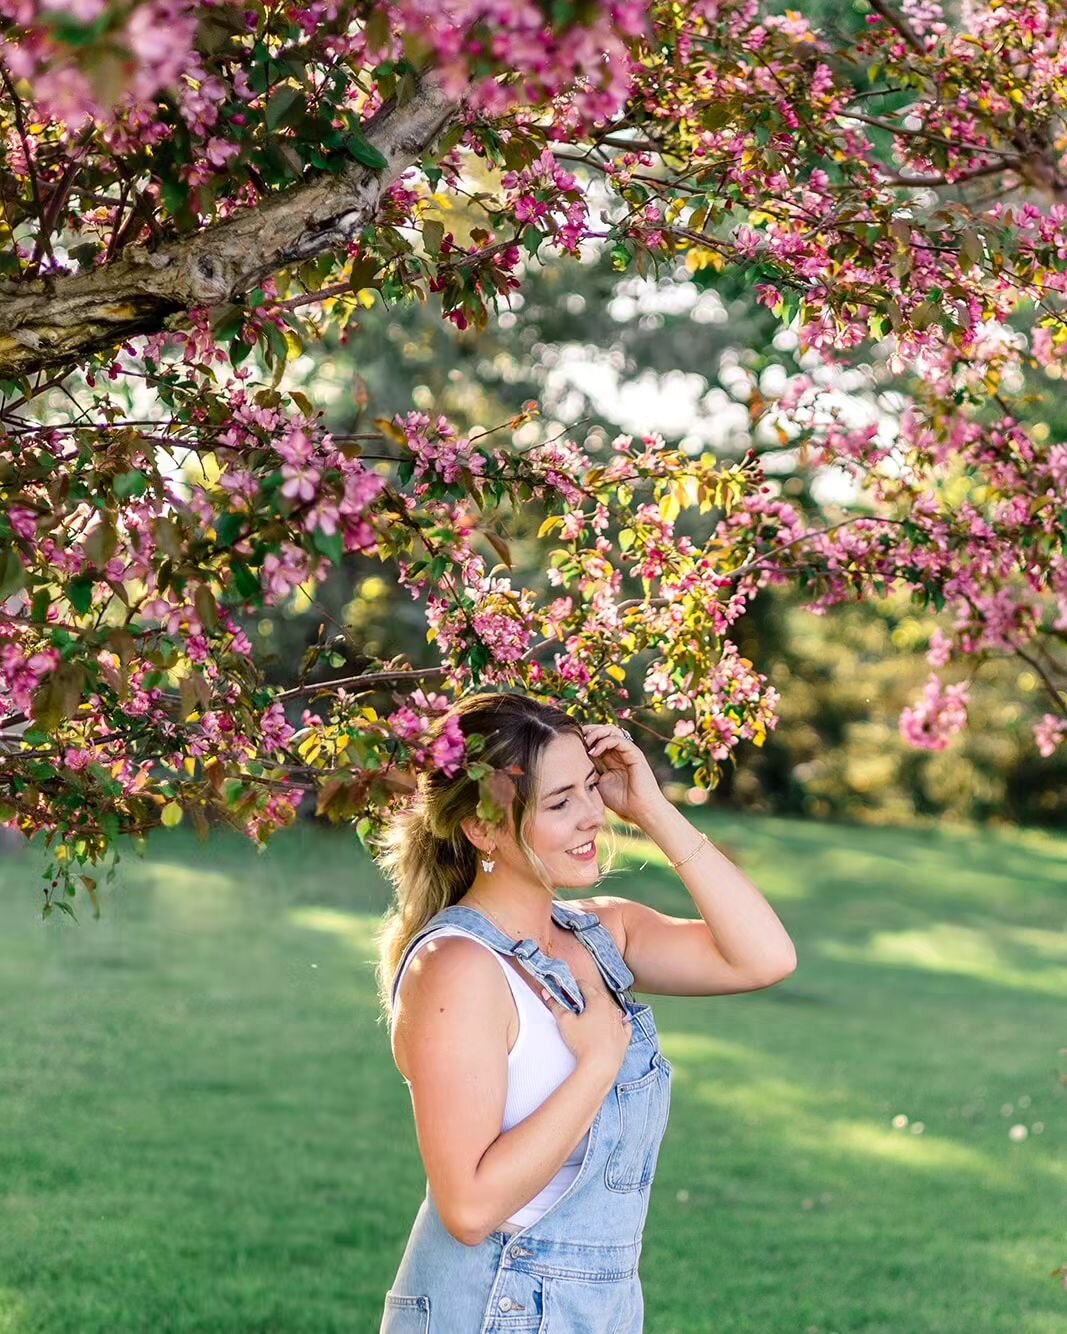 Last night was magical ✨

Leah is always down to get creative and have fun at our shoots! The apple blossoms with the overalls are such a vibe. Leah rocked it!! 

Baby Lennox tagged along &amp; gave me a good arm workout holding him while his mom got